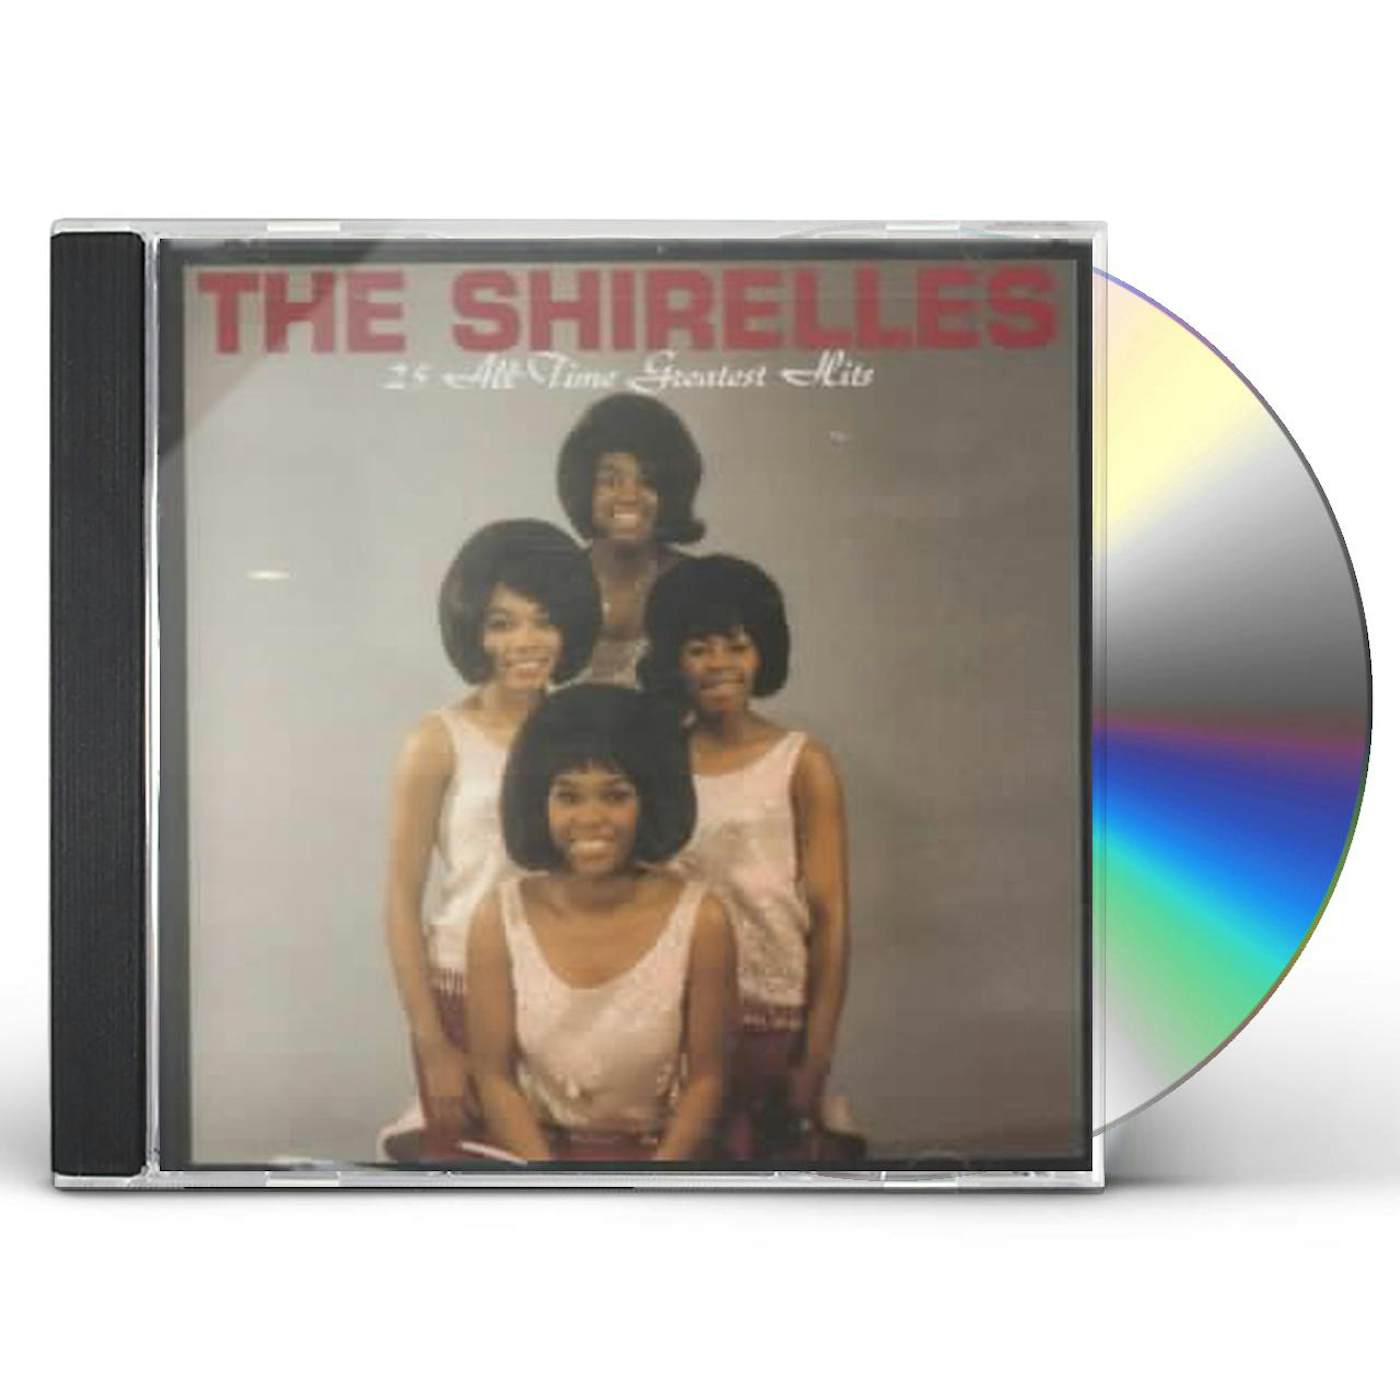 The Shirelles 25 ALL-TIME GREATEST HITS CD